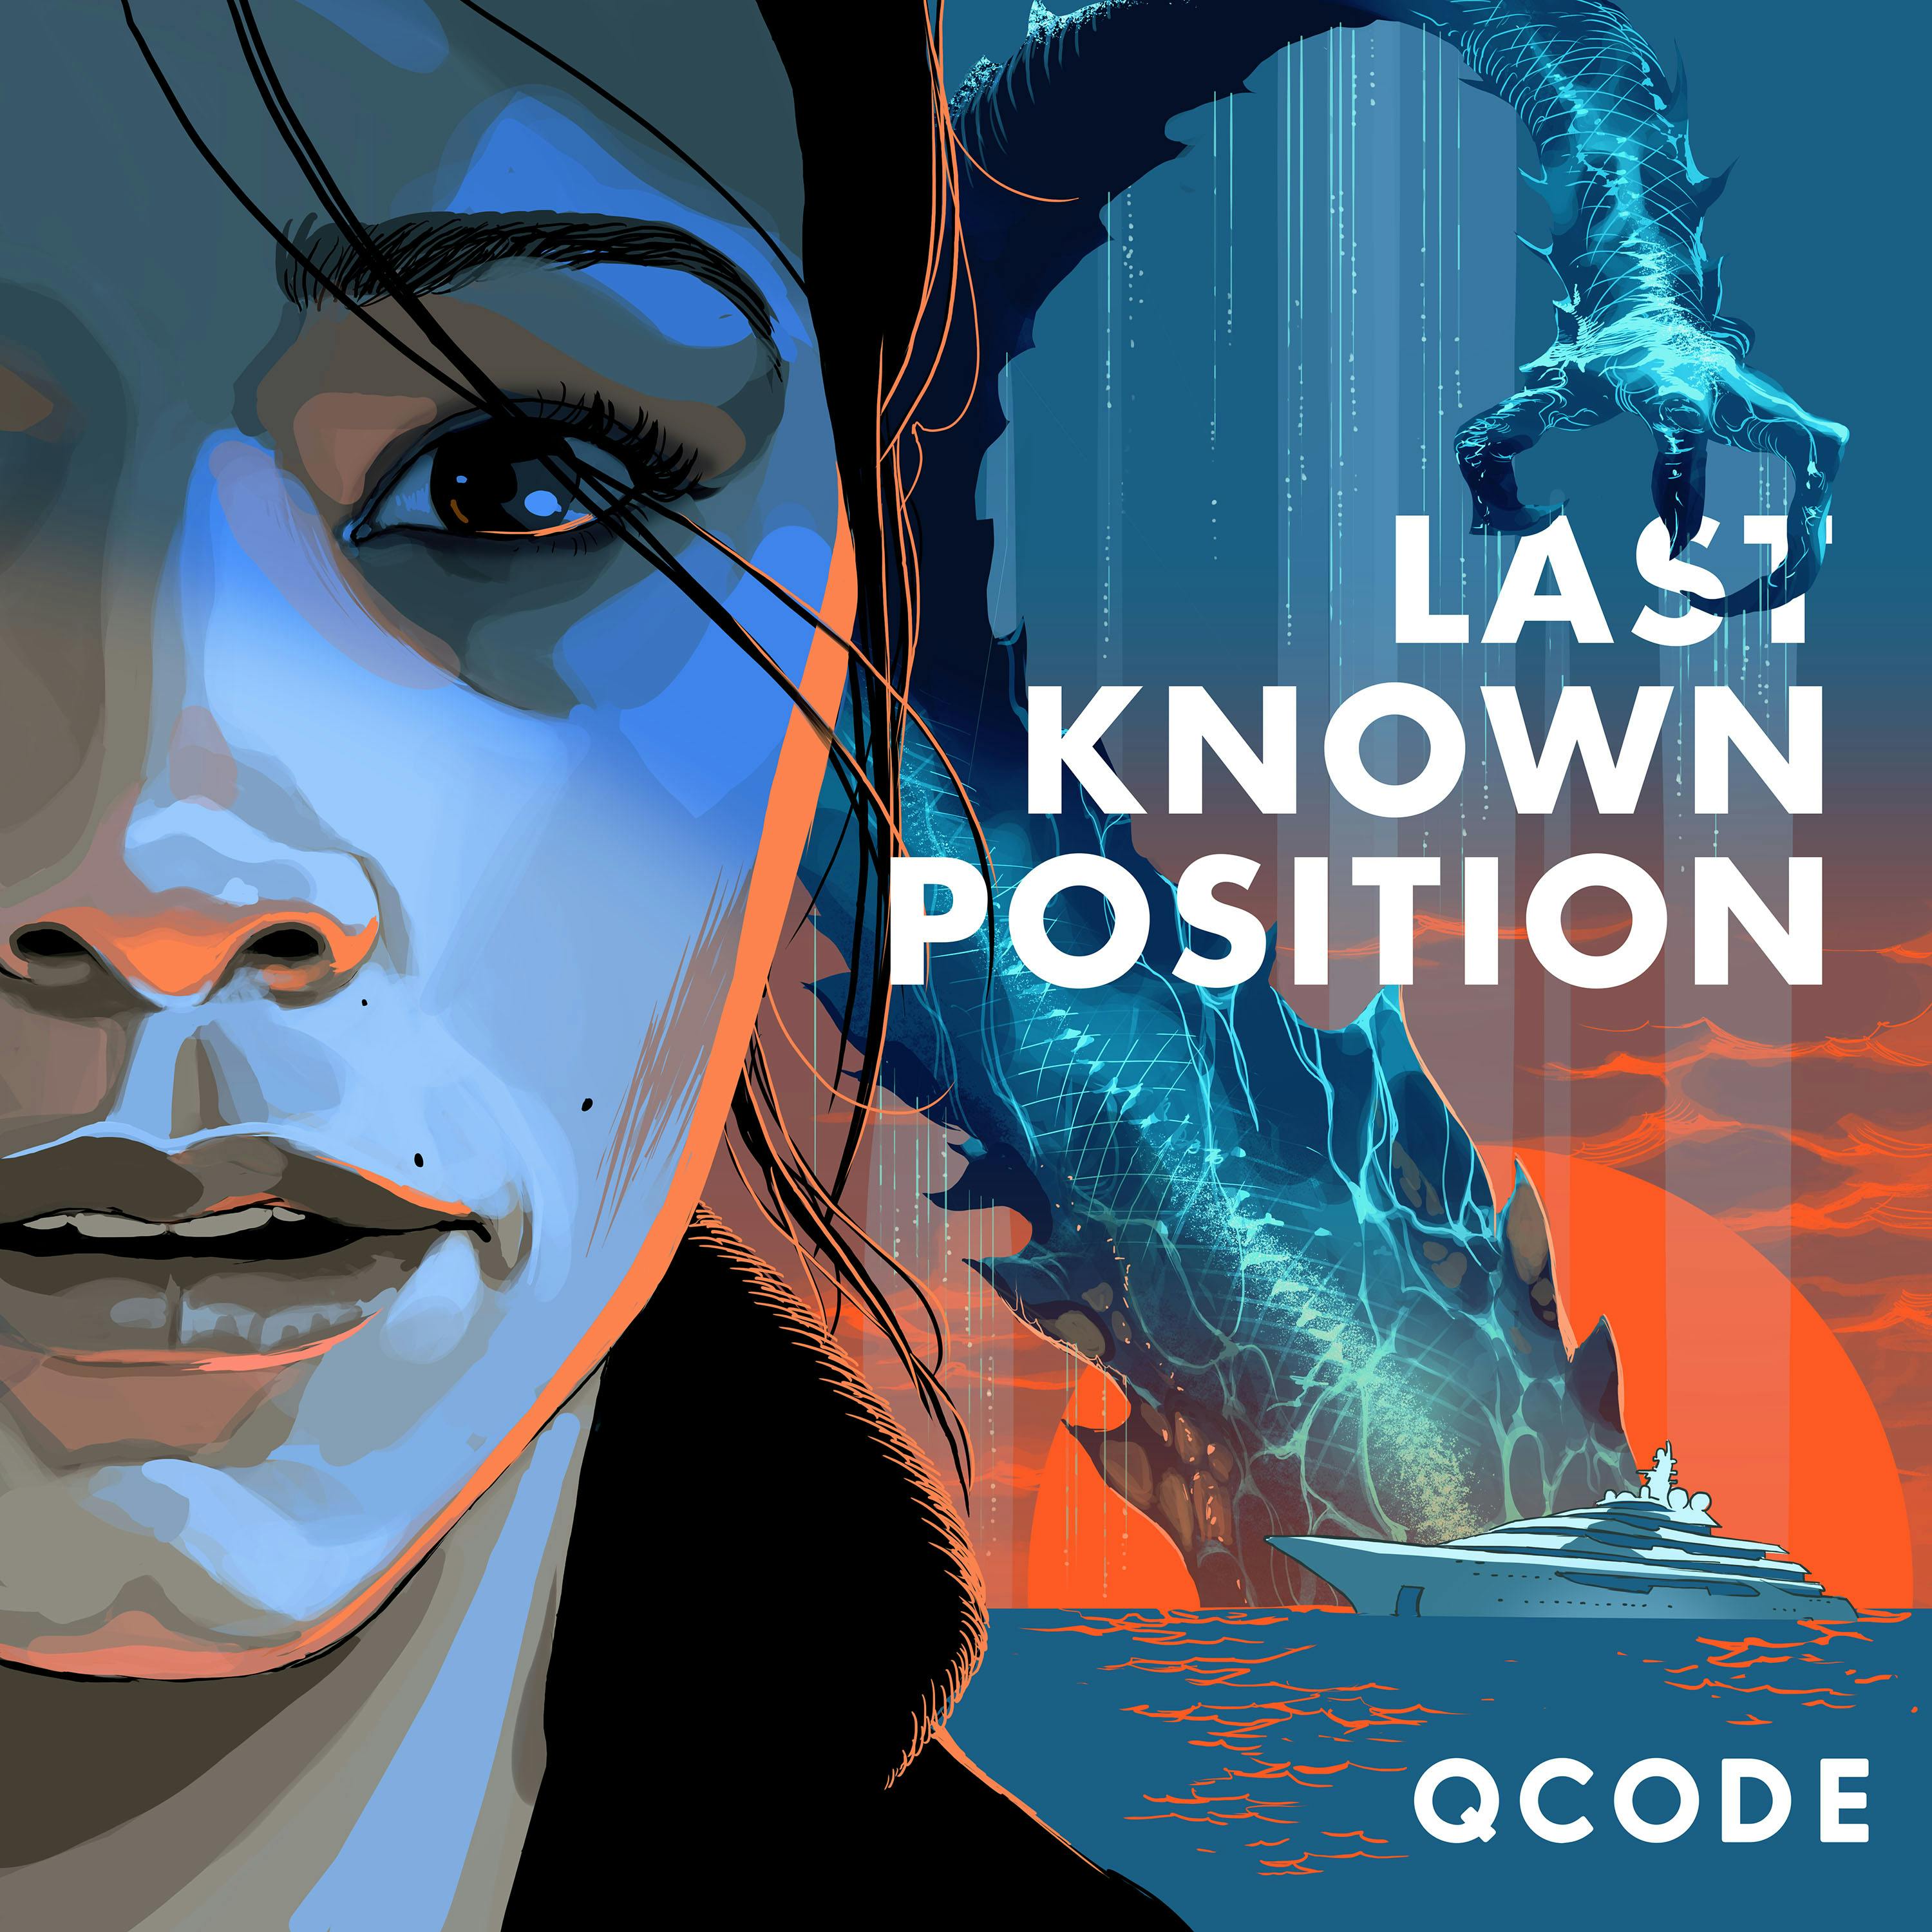 Introducing: Last Known Position – Starring Gina Rodriguez